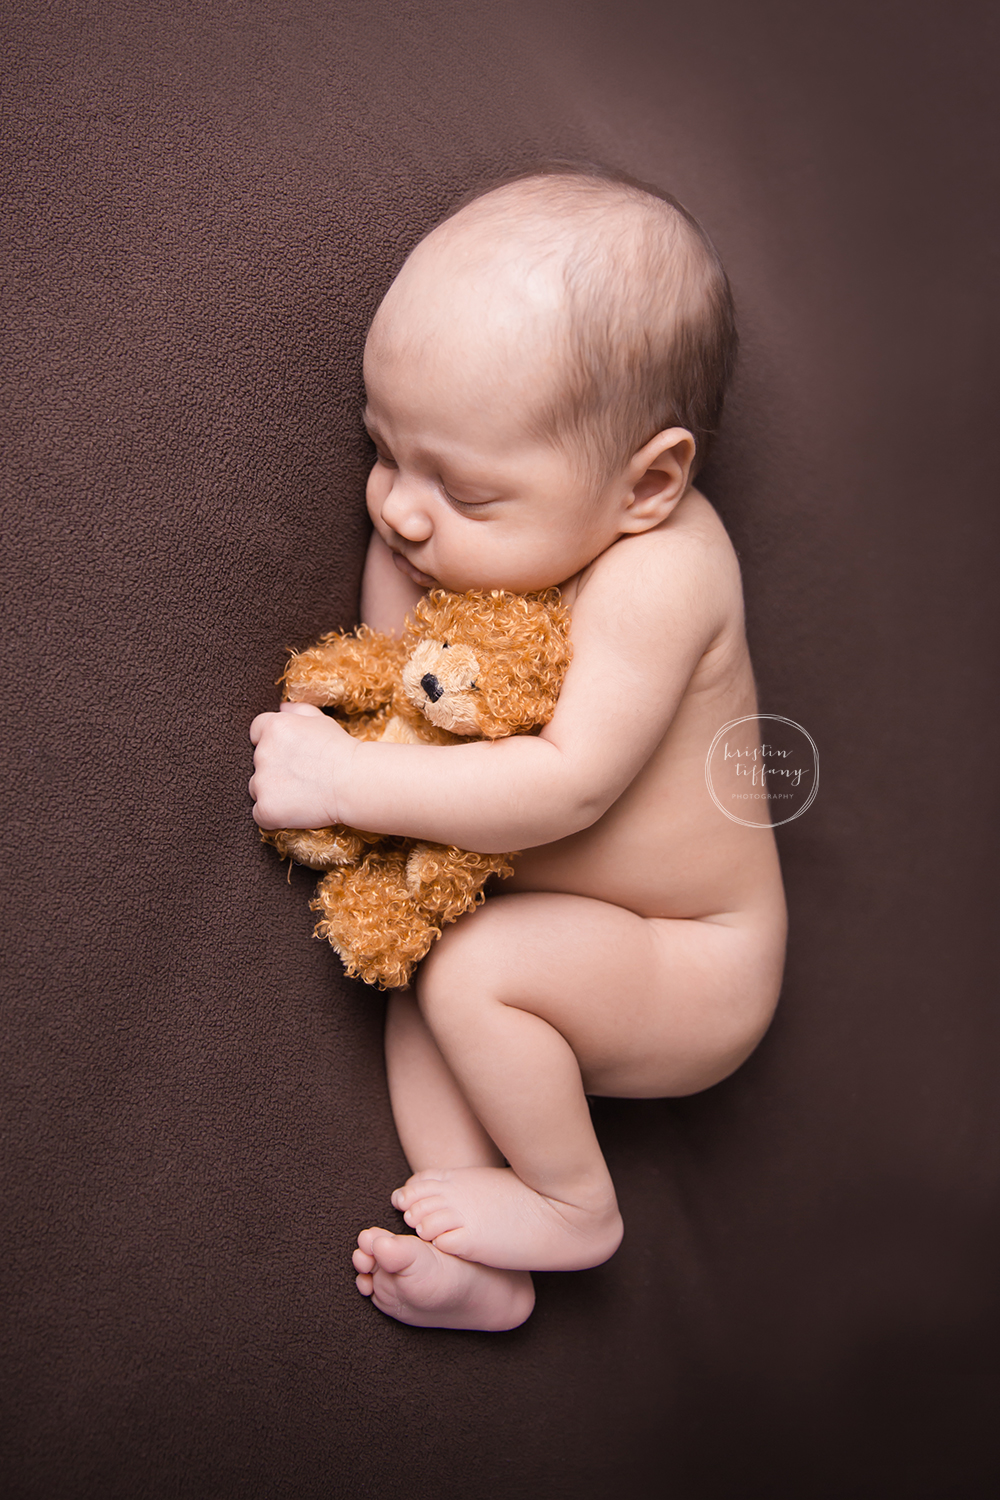 a photo of a newborn baby with a small teddy bear